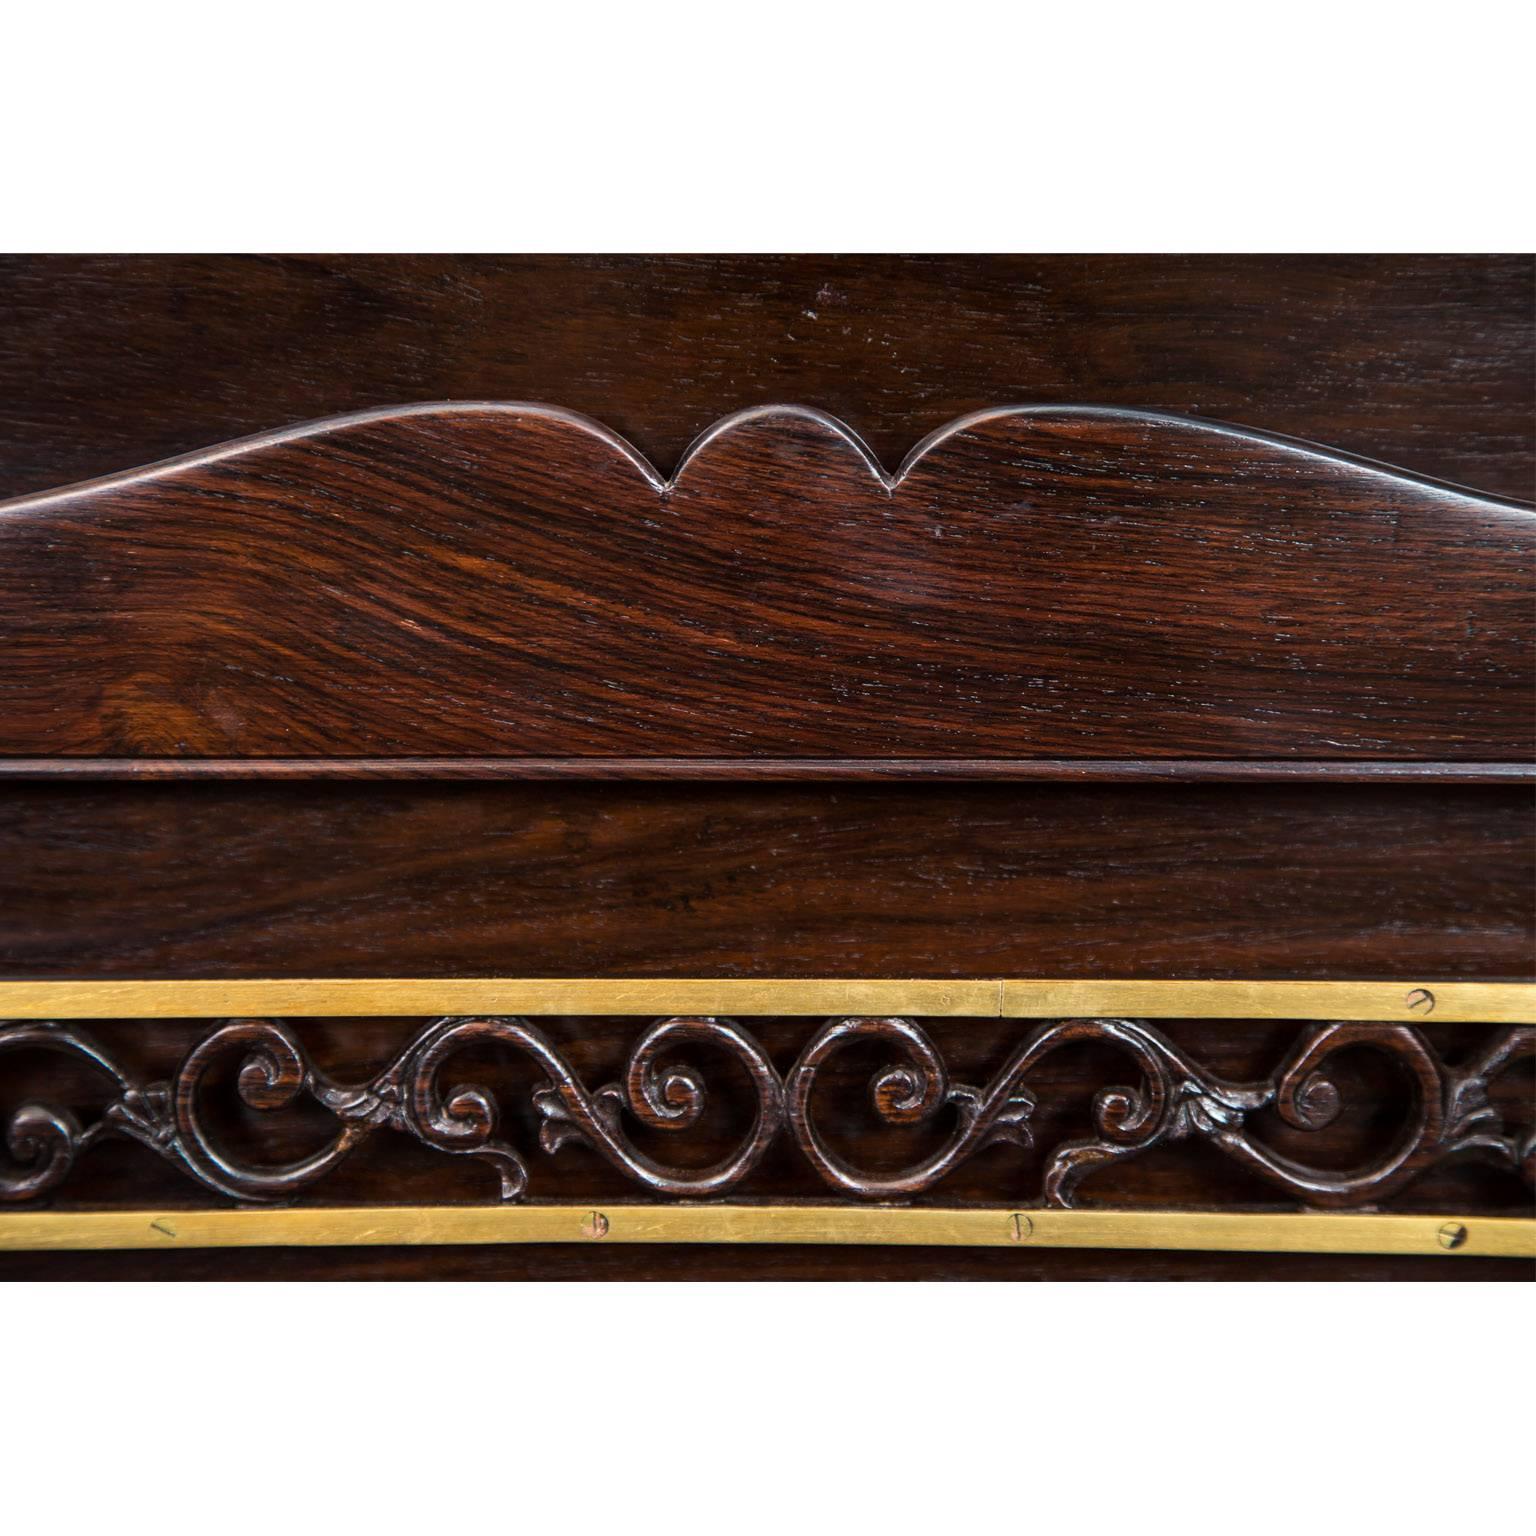 Anglo-Indian or British Colonial Teakwood Writing Box 3